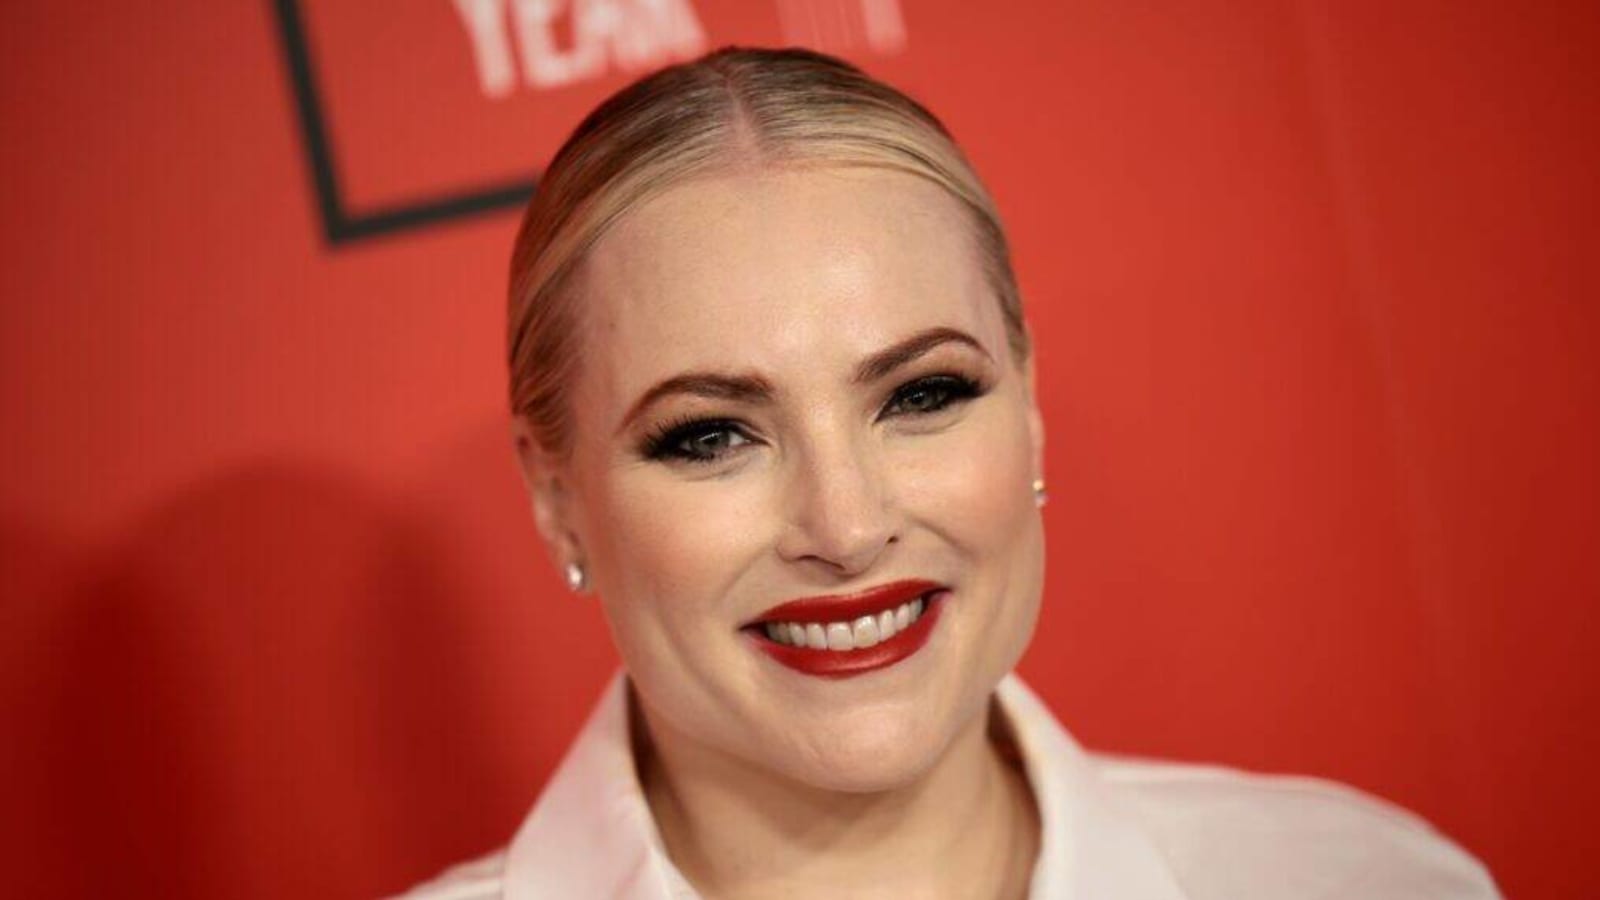 ‘The View’: Meghan McCain Says ‘There’s Not a Chance in Hell’ She’d Ever Return to Show